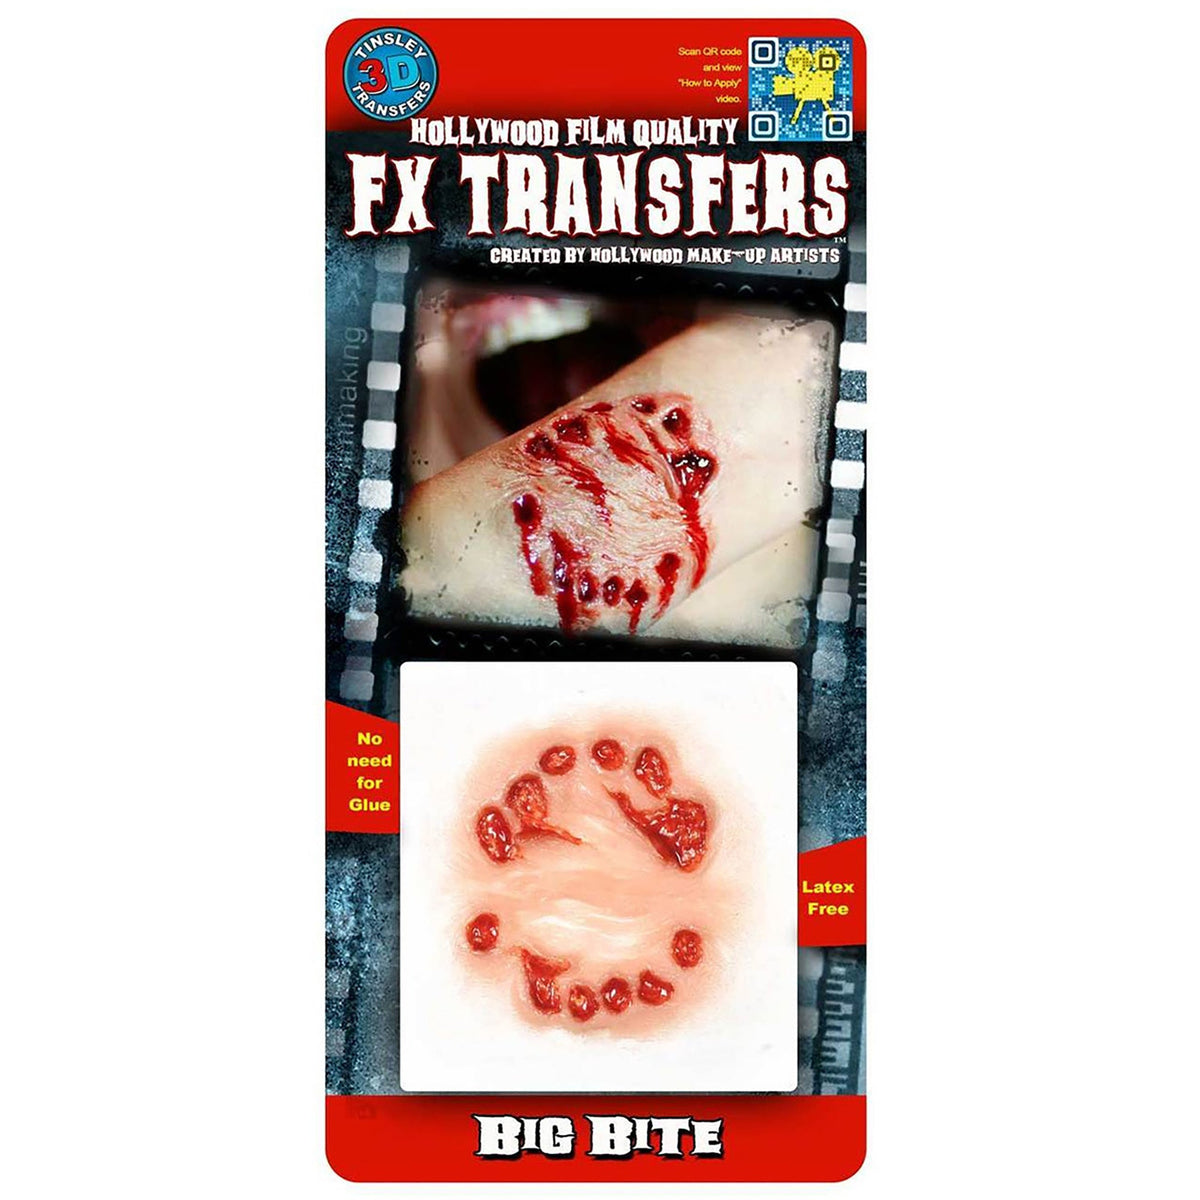 TINSLEY TRANSFERS INC Costume Accessories Big Bite Prosthetic, 1 count 857914003319